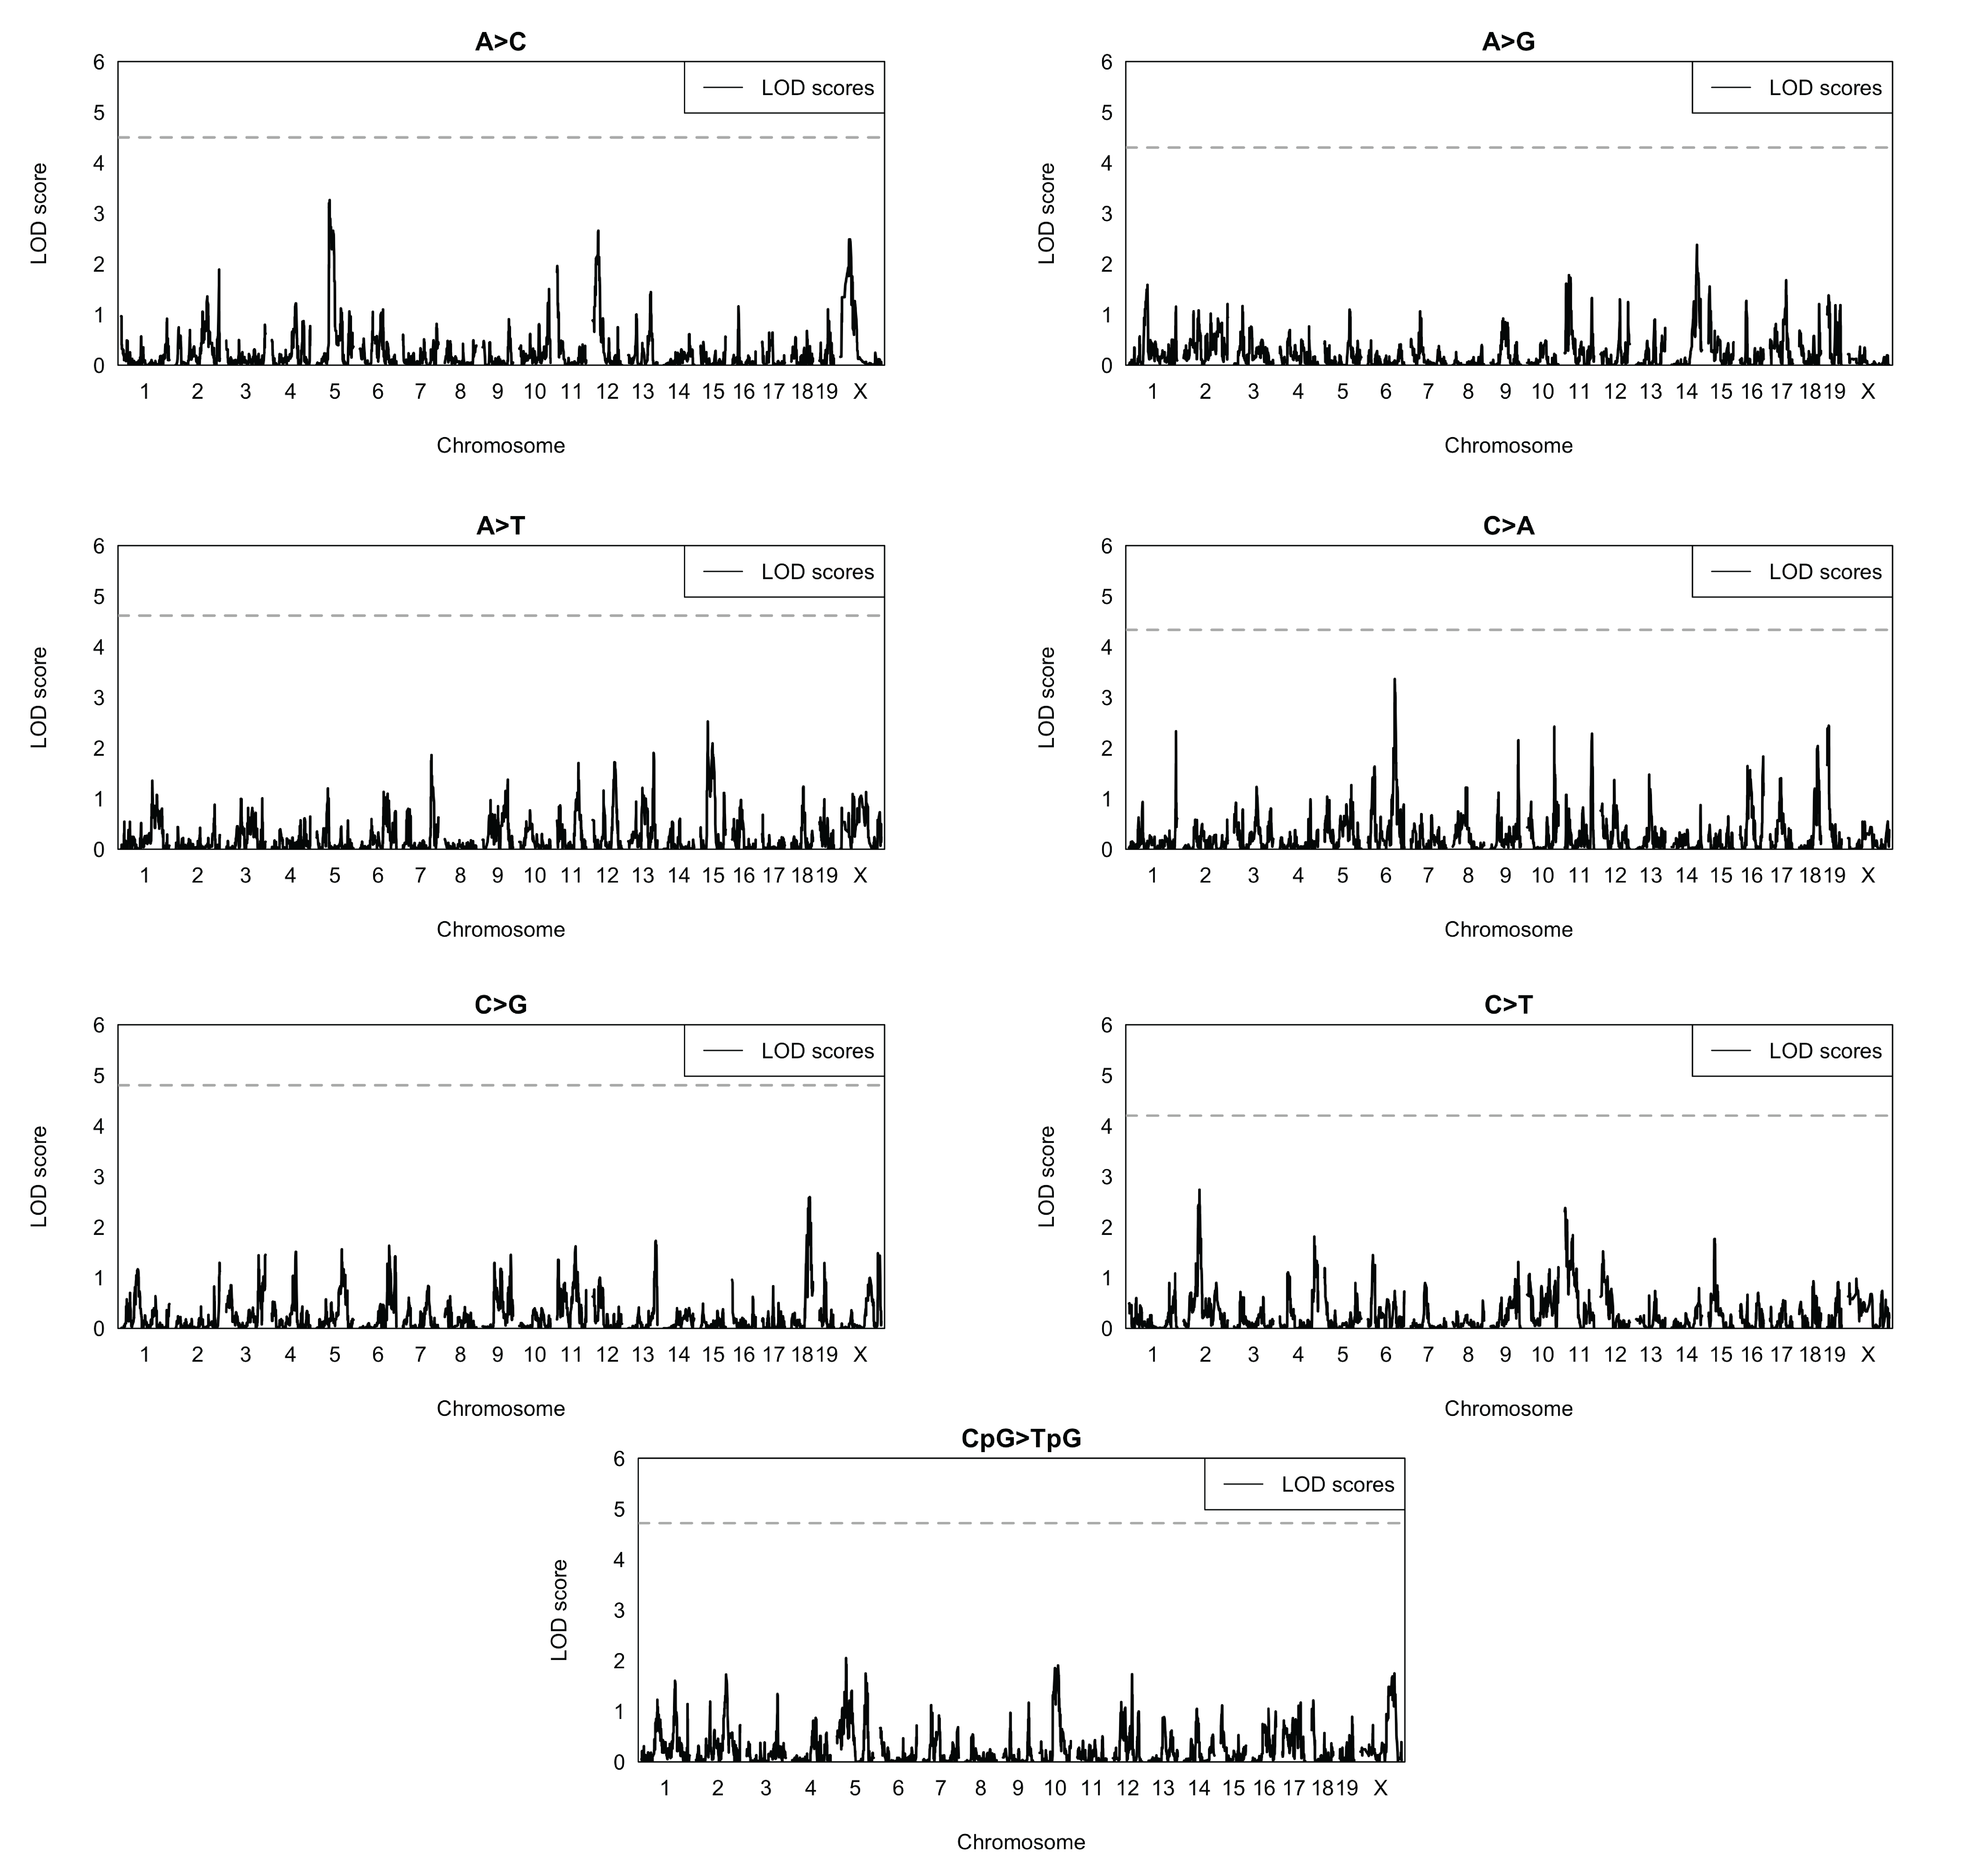 Figure 2-figure supplement 1: Quantitative trait locus scans for mutation spectrum phenotypes. Using the BXDs with D genotypes at rs27509845 (the marker with the highest cosine distance on chromosome 4; n = 66 BXDs, 42,171 total mutations), we used R/qtl2 to perform QTL scans for the fractions of each 1-mer mutation type. QTL scans also included a kinship matrix (that contained the pairwise genetic similarity between each pair of BXDs, calculated using the leave-one-chromosome-out method) as a random effect term using the kinship keyword argument in the scan1 function. Plots show the log-odds (LOD) score at every genotyped marker in blue; the dotted black line represents the genome-wide LOD significance threshold (established using 1,000 permutations at an alpha of \frac{0.05}{7} to account for the fact that 7 separate association tests were performed.)